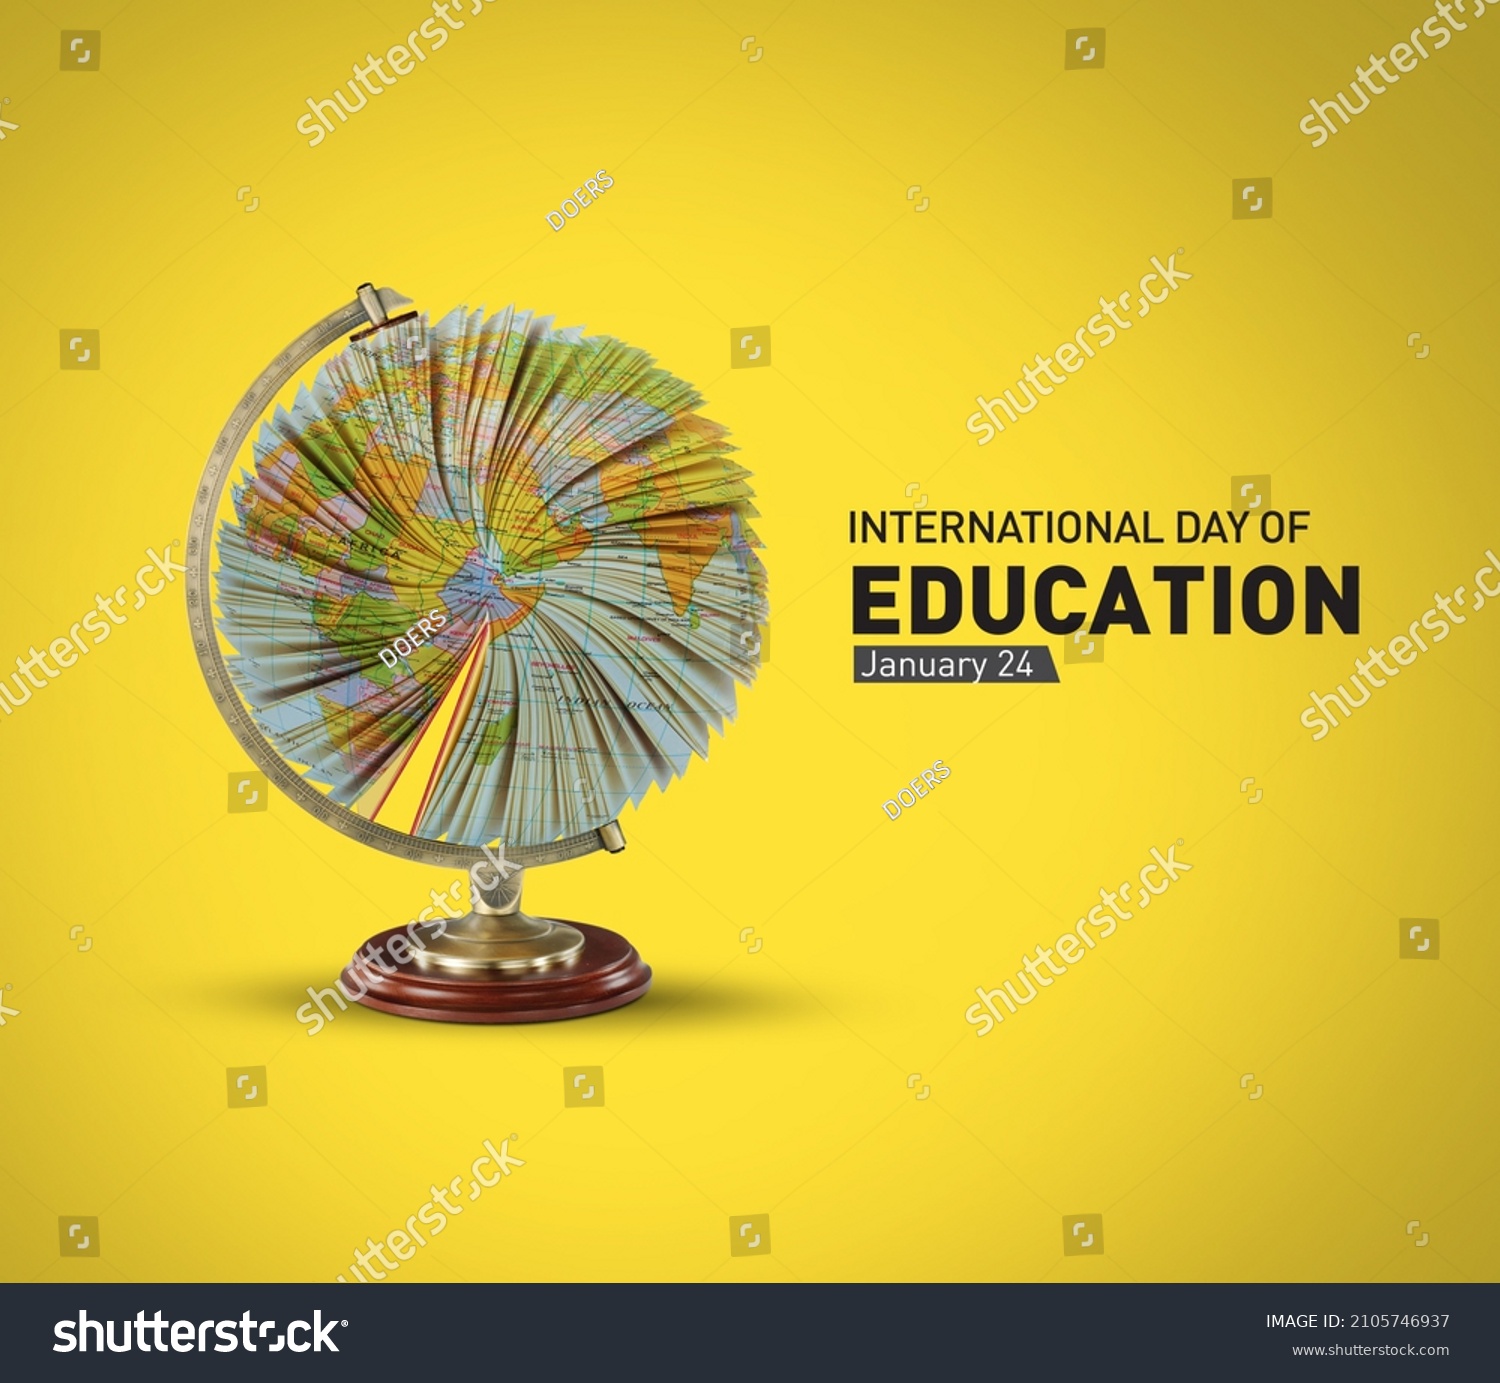 International Day of Education concept Illustration. World or earth globe isolated on book pages in round shape.  #2105746937